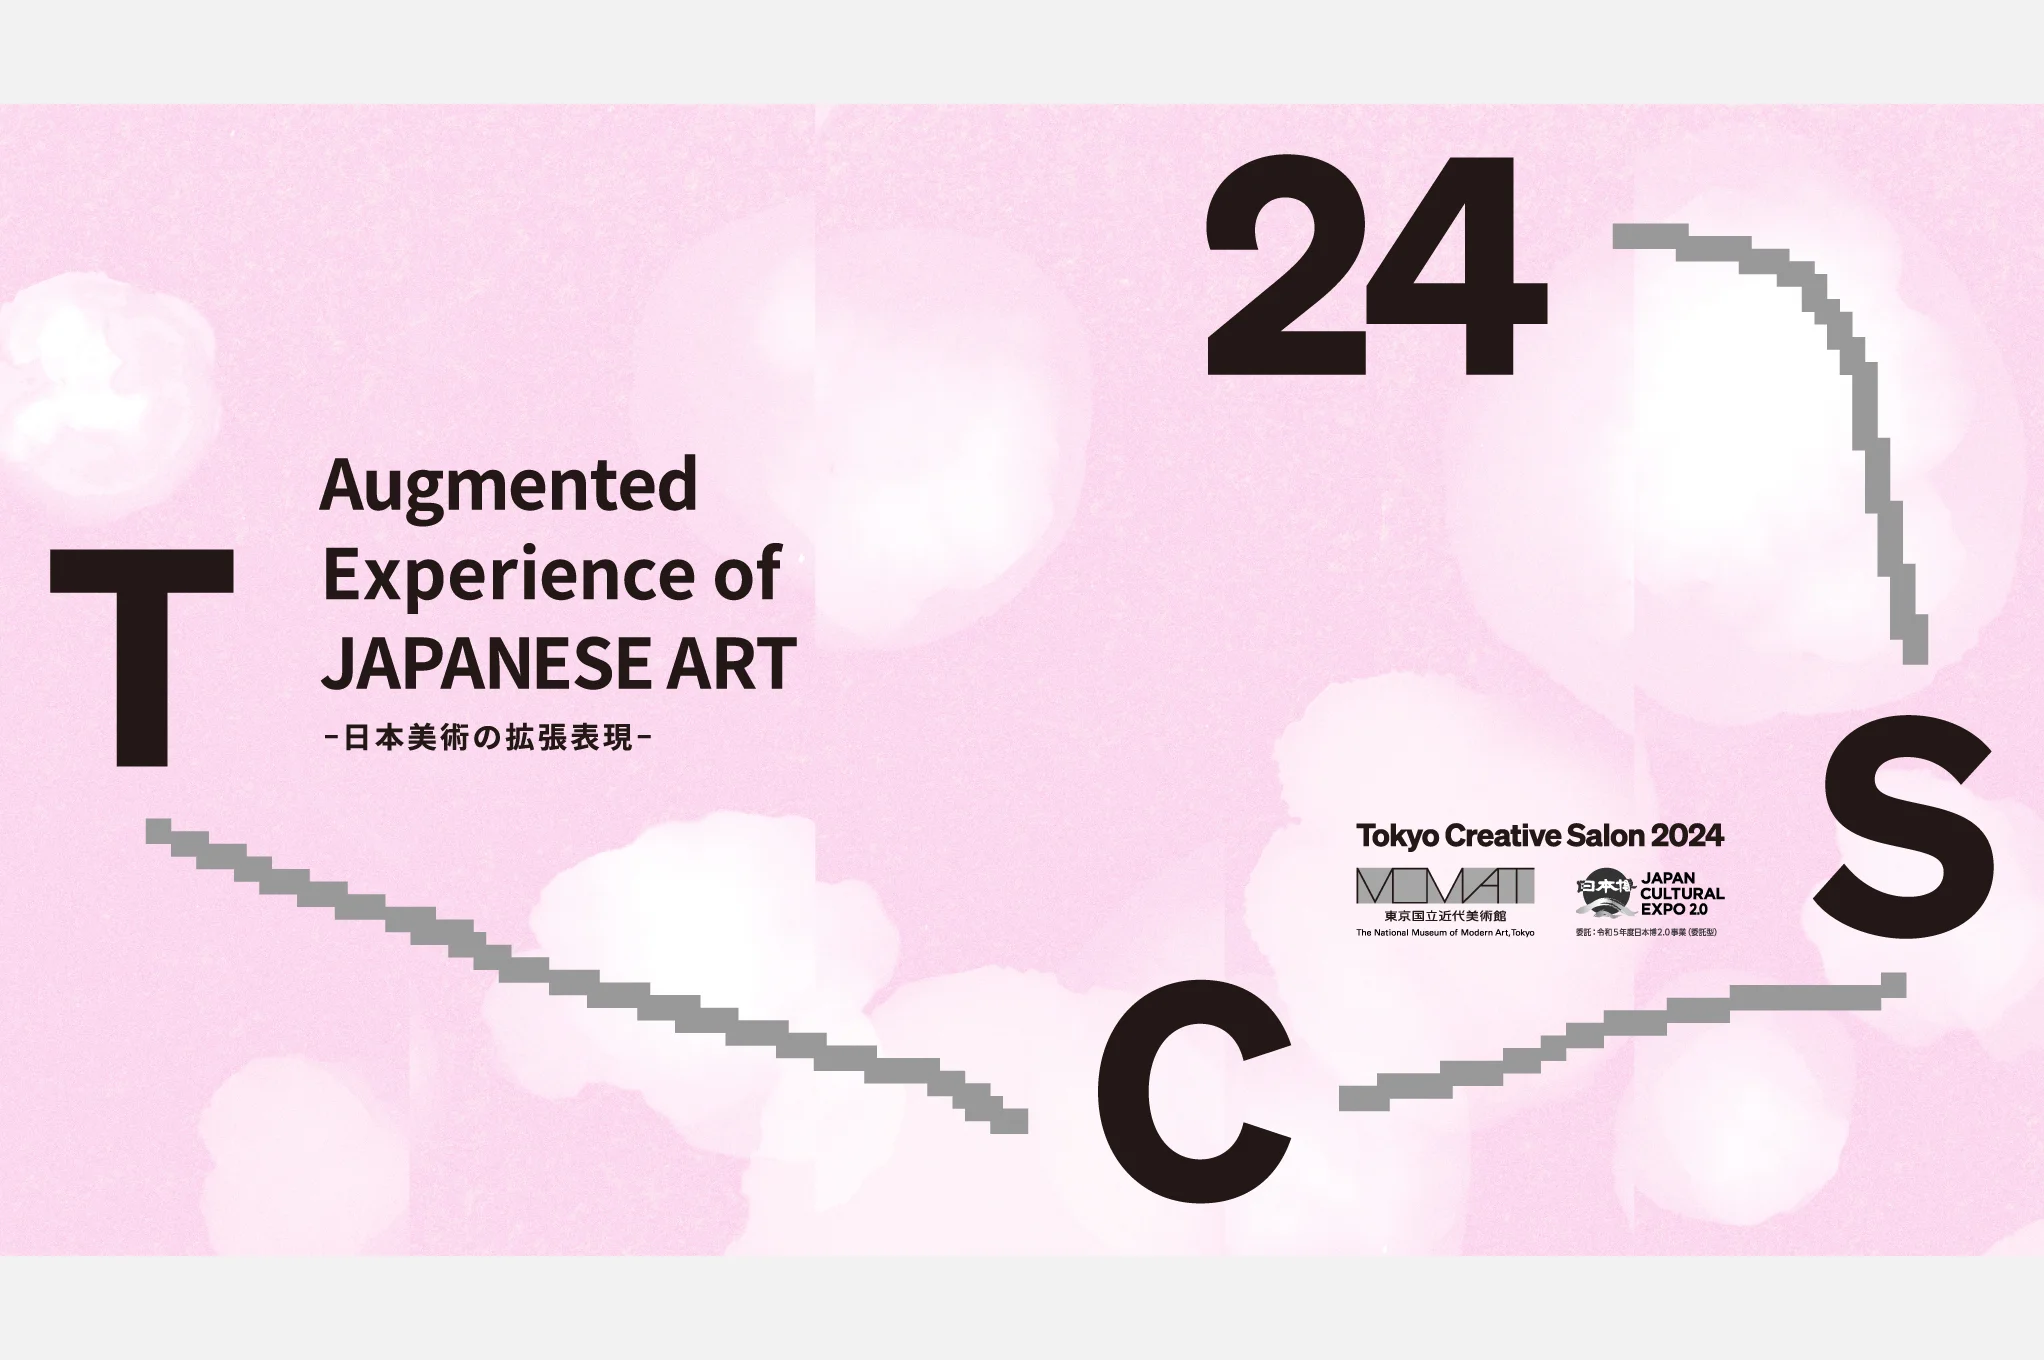 Augmented Experience of JAPANESE ART